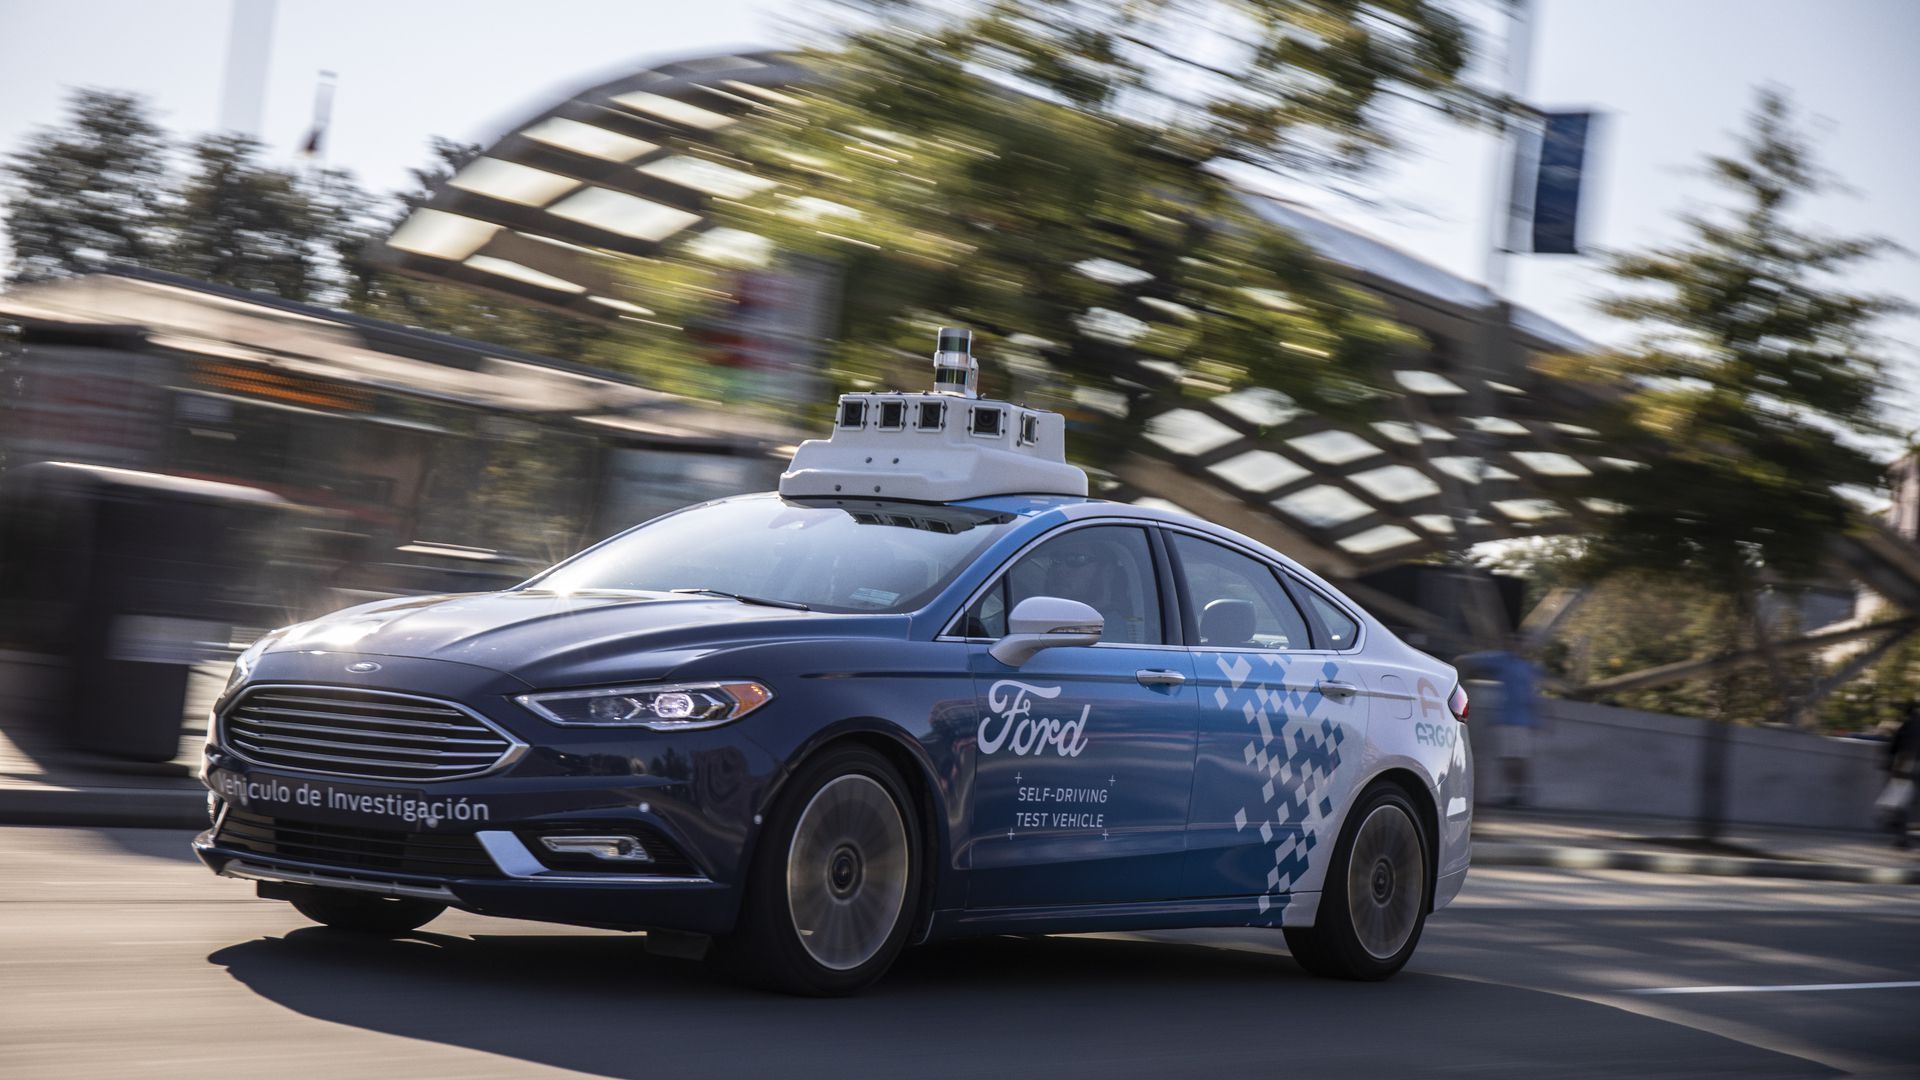 Photo of Ford autonomous vehicle on streets of D.C.